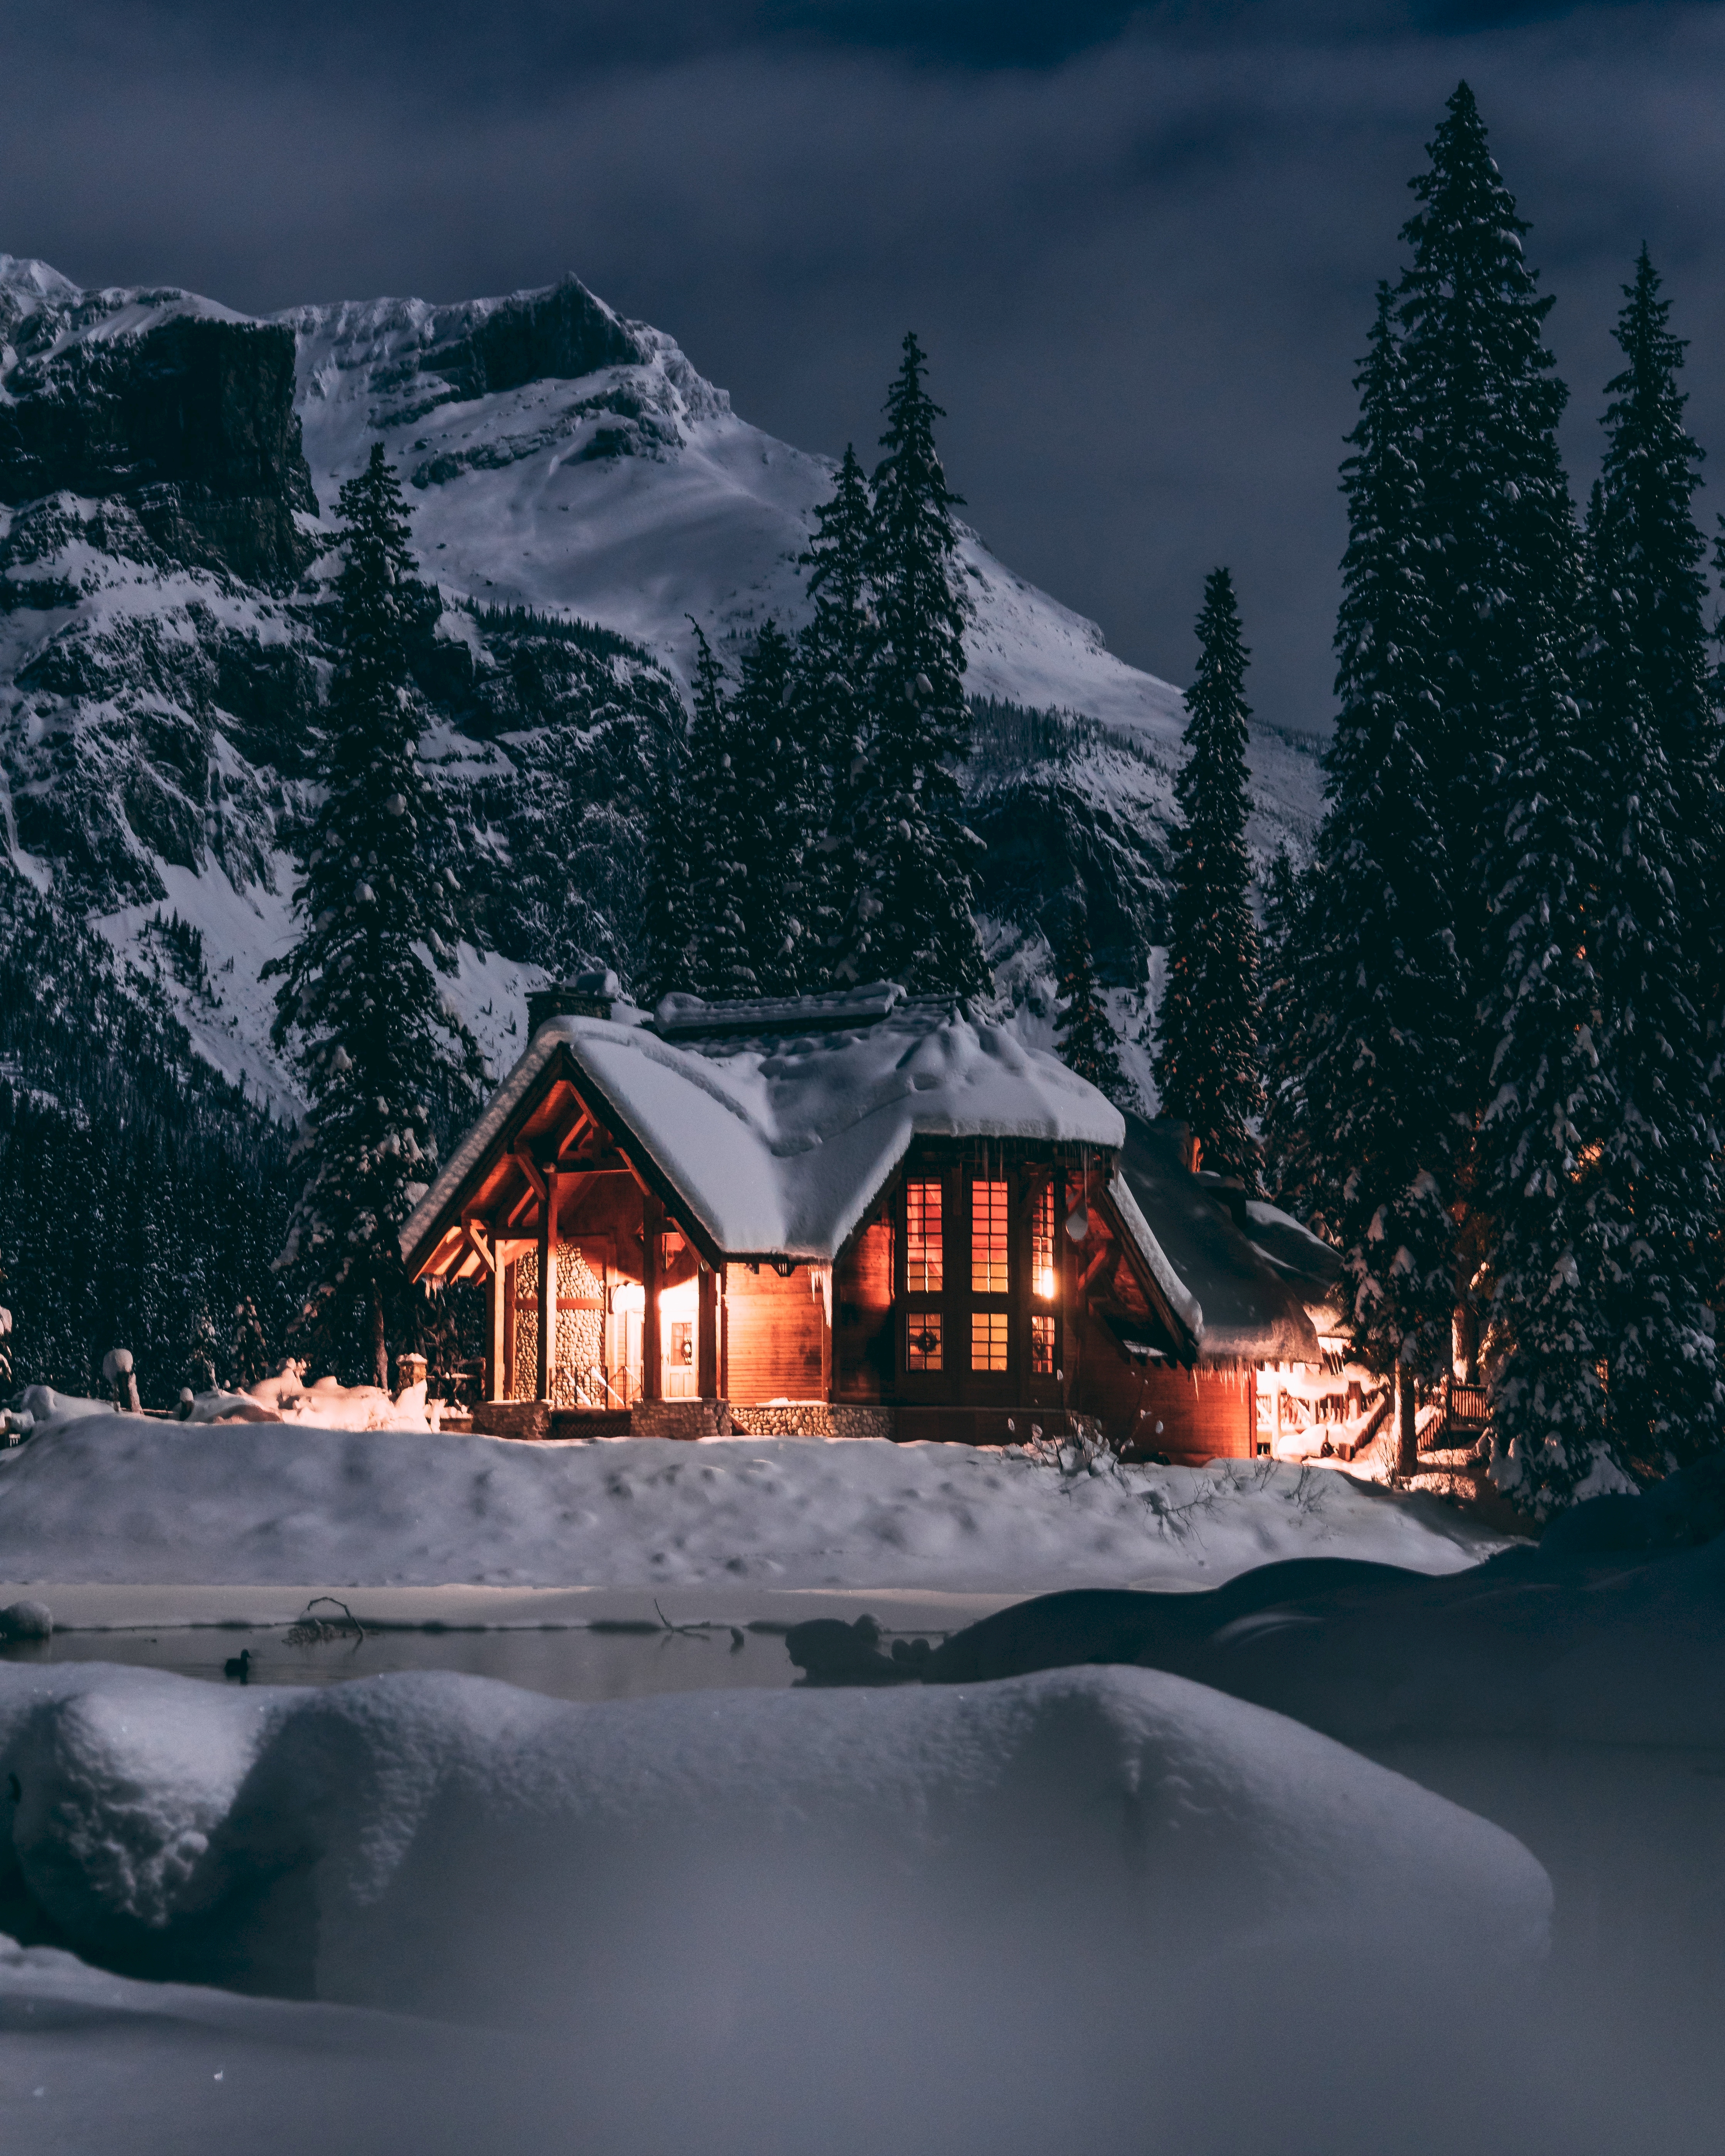 snow, winter, nature, trees, small house, lodge, evening UHD